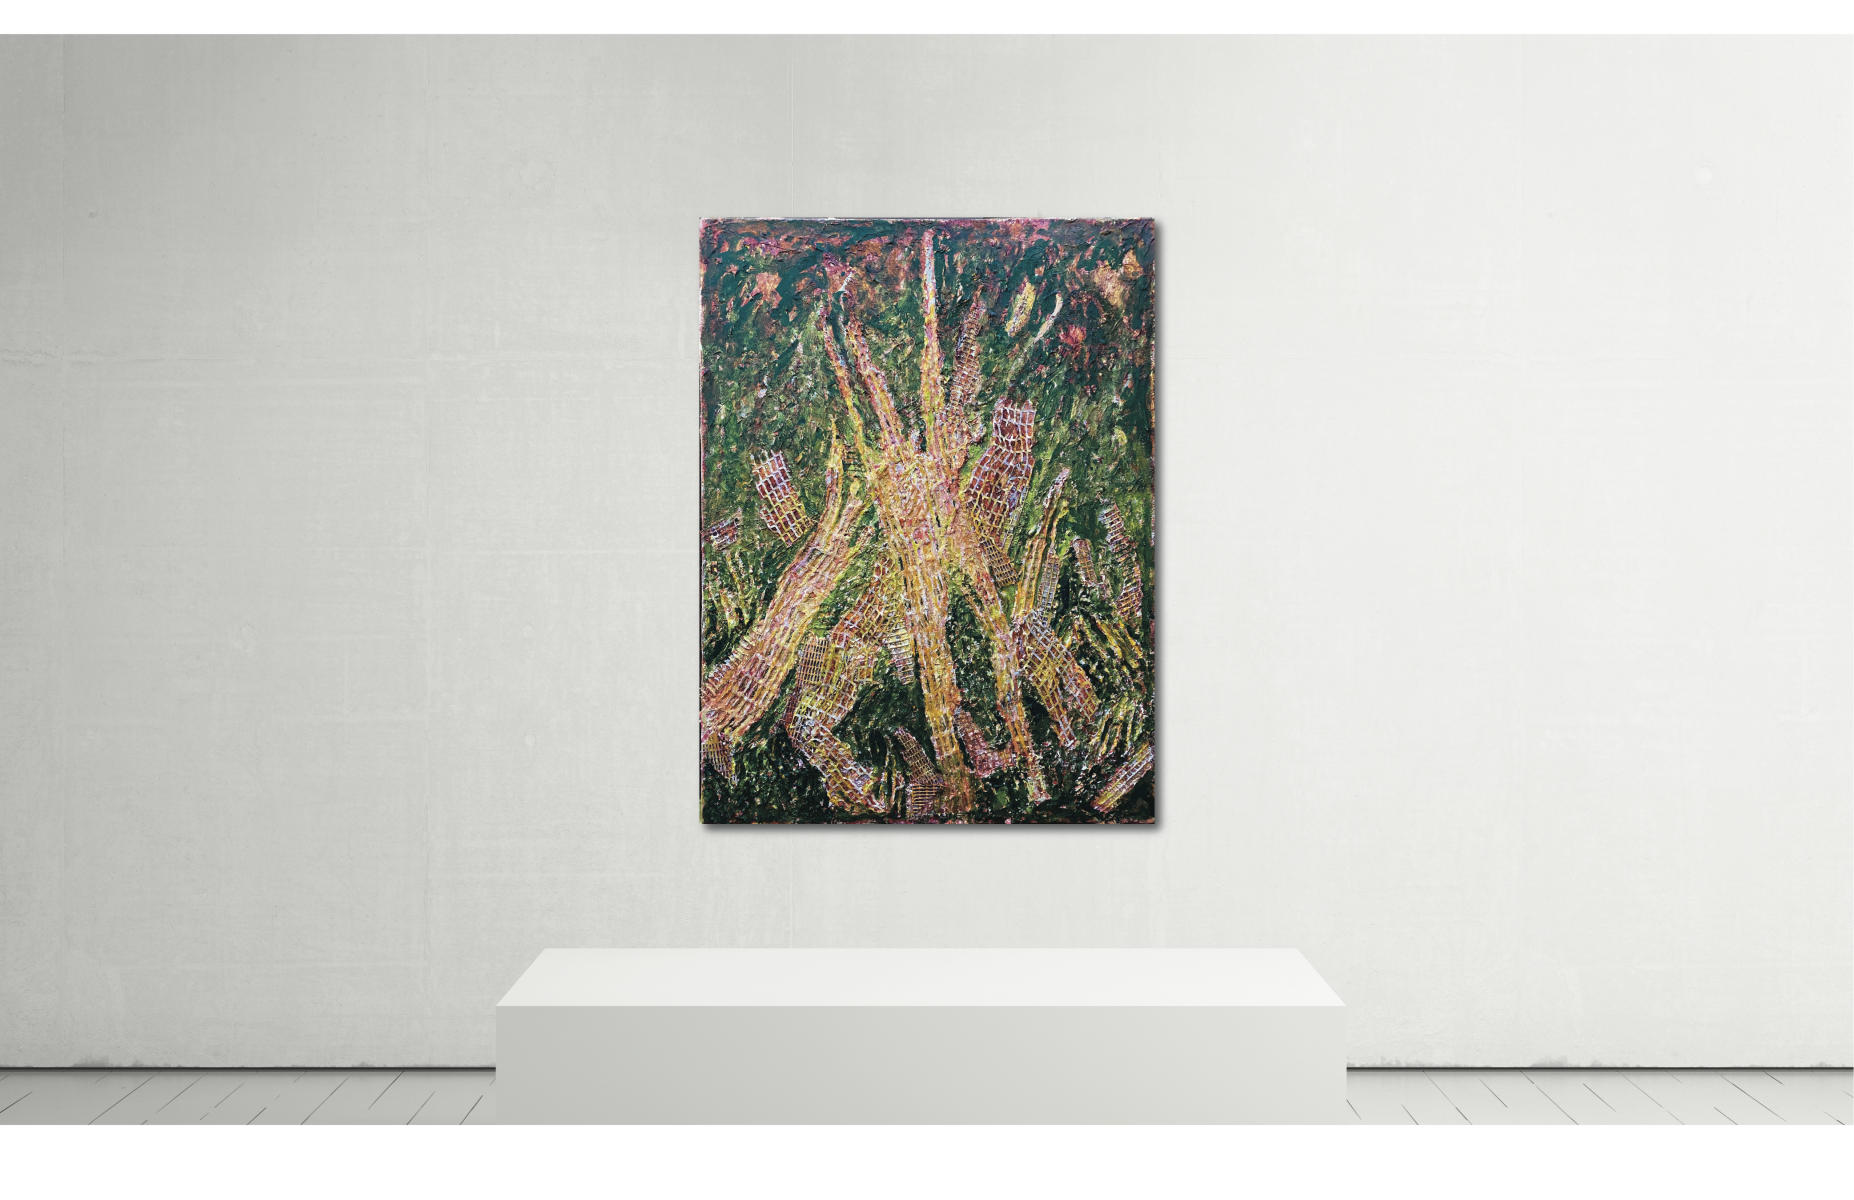 Shards | "Moss Green Alert" | Approximate unframed scale view